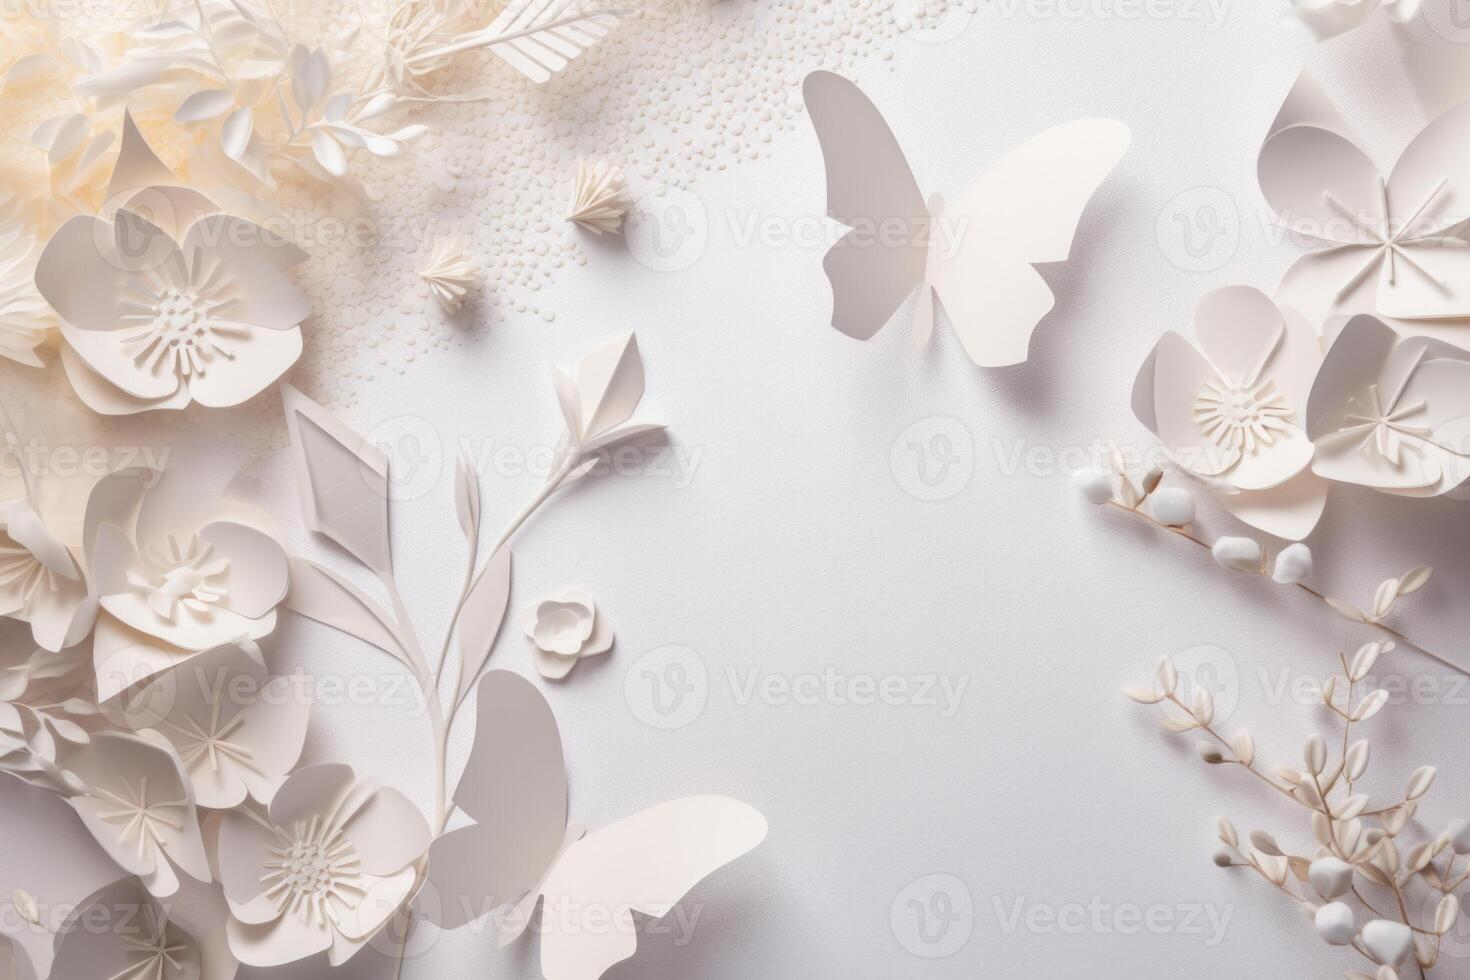 Top View 3d Wallpaper, White Flowers with Branches having Bright Light Color Incredibly Detailed Butterflies. . photo